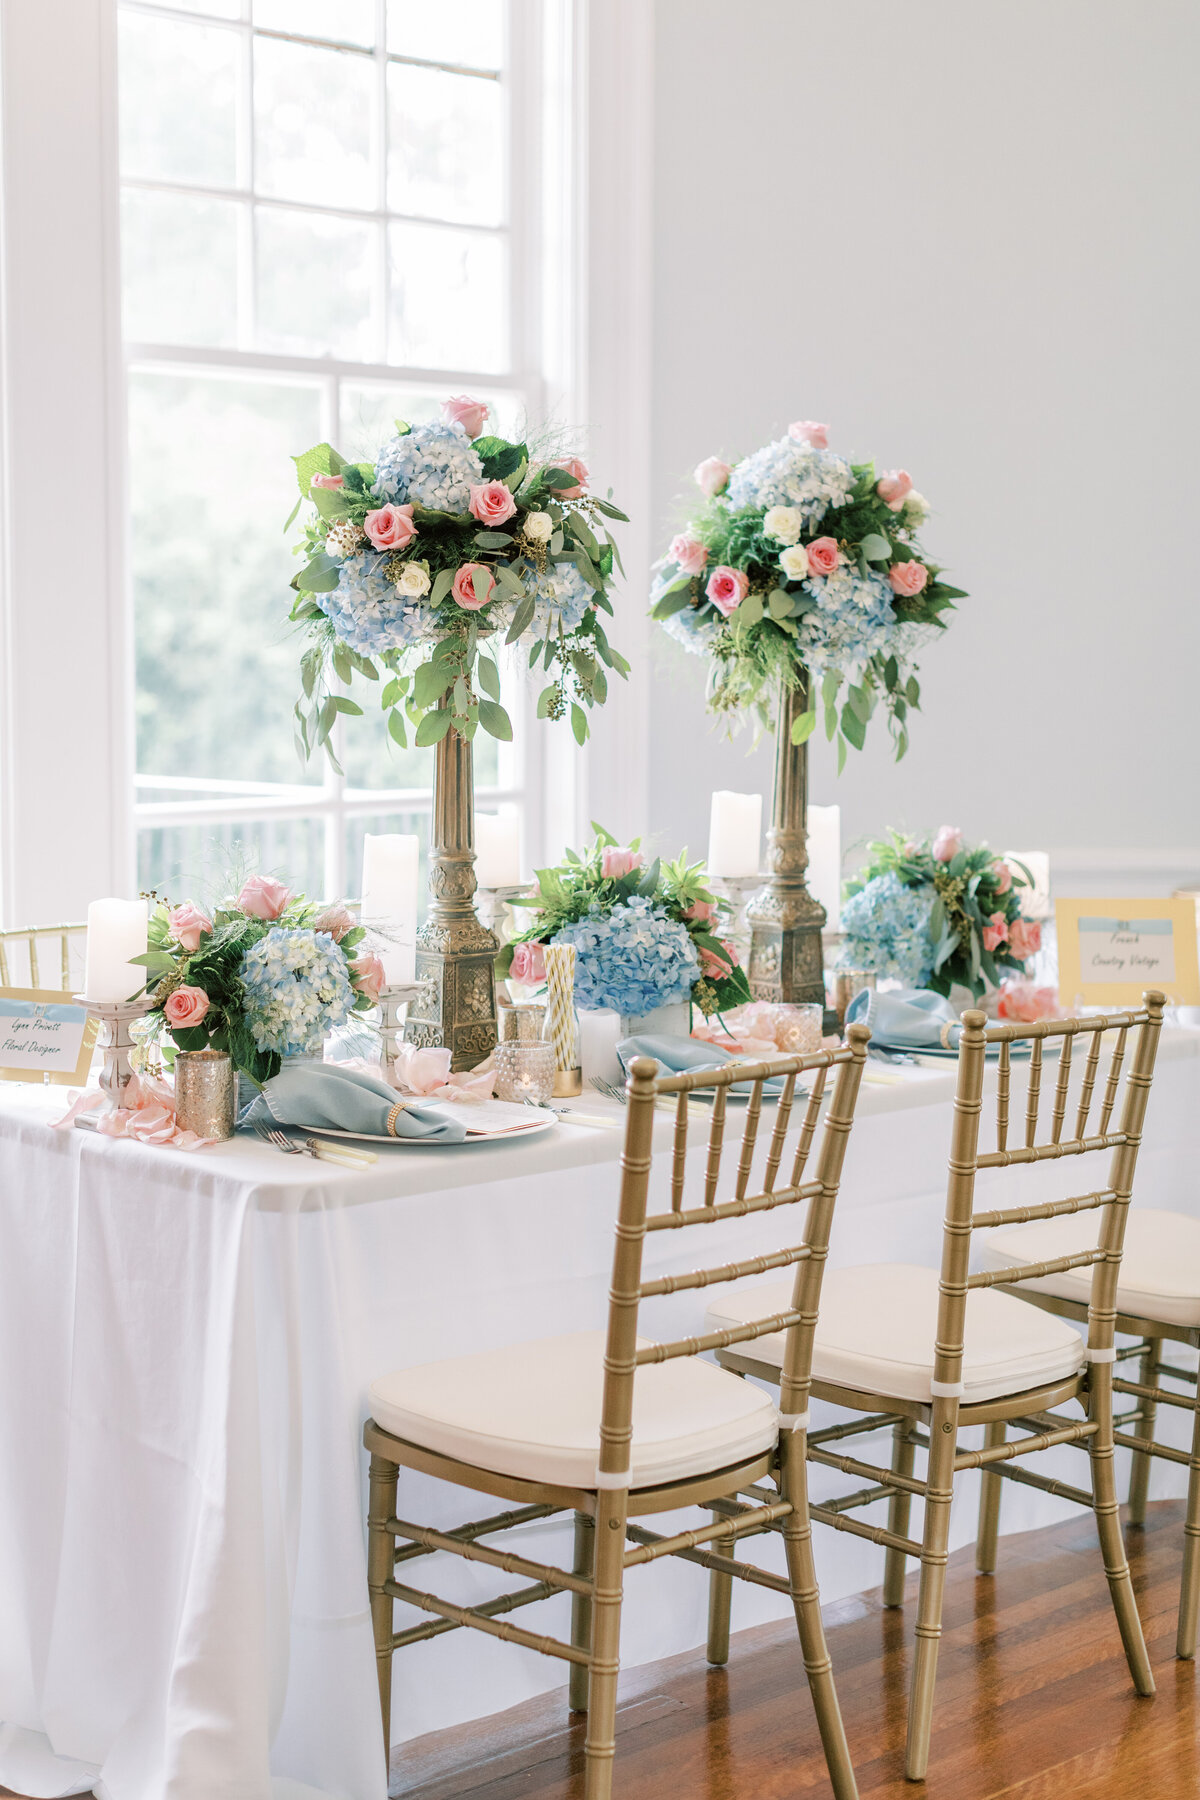 A beautiful floral tablescape sits on the table.